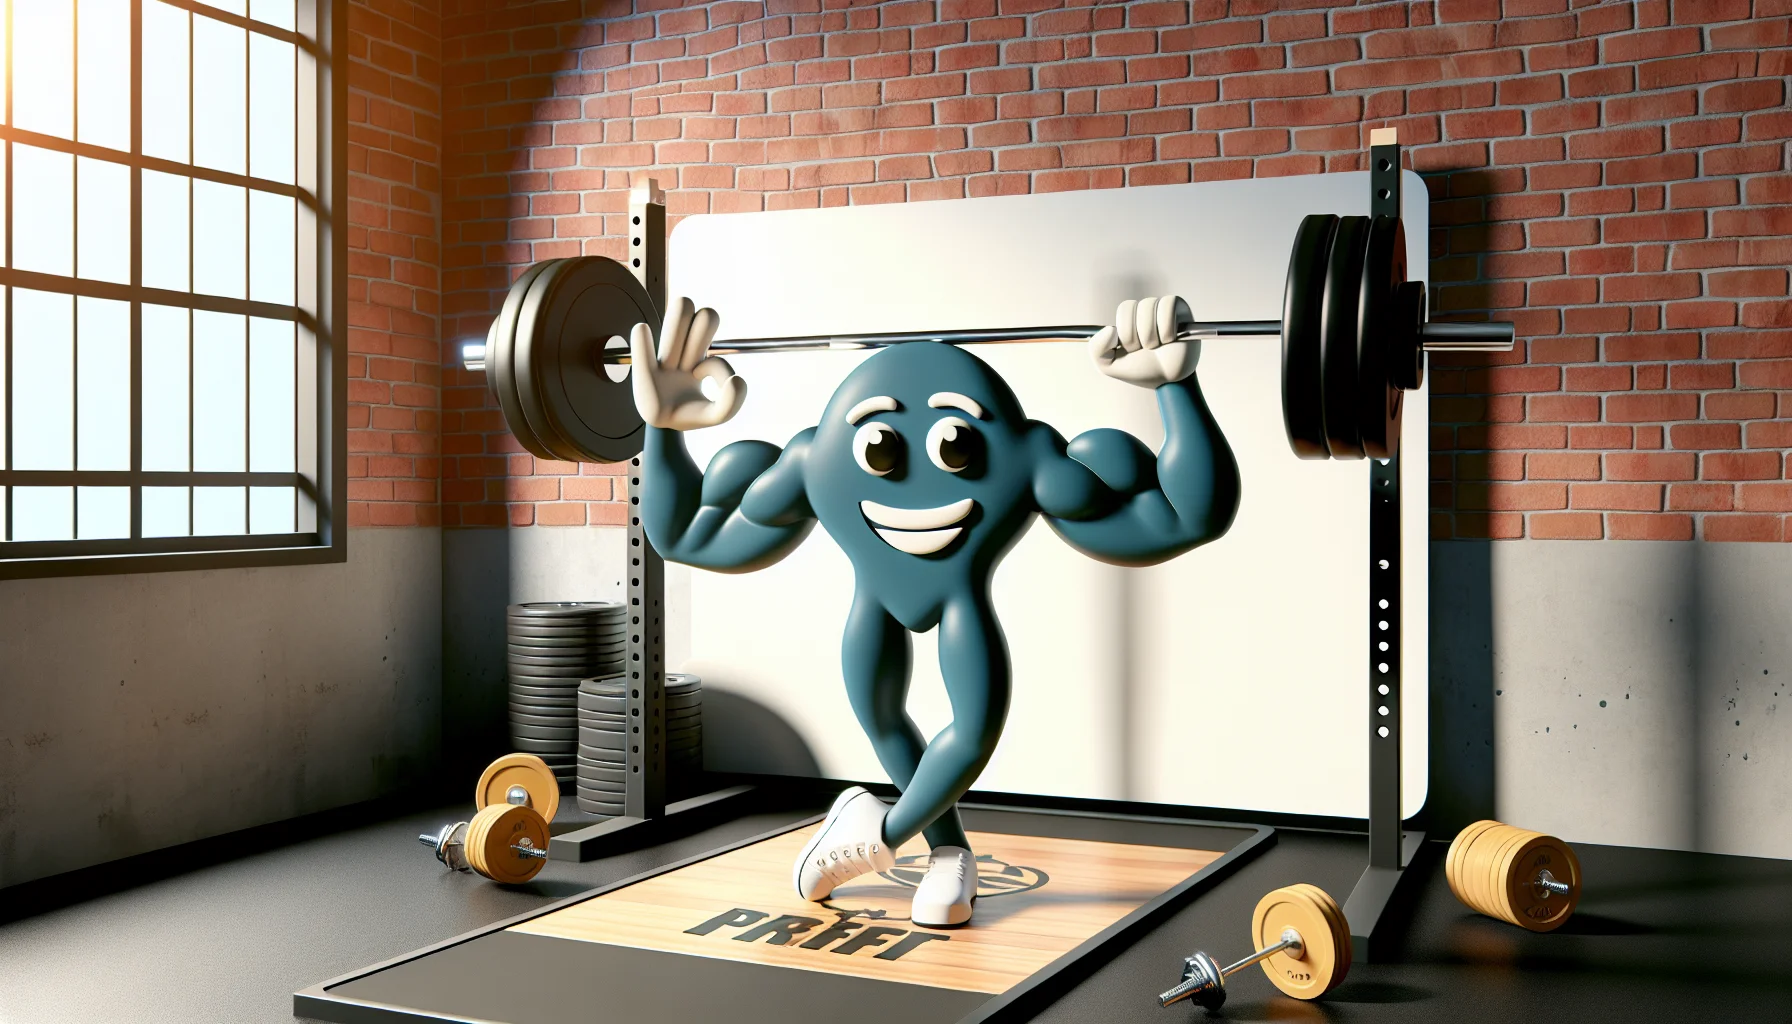 Create a humorous scene featuring a powerlifting logo. This comedic scene should encourage people to engage in physical exercise. The logo could be in a human-like form, showing off a playful muscle-flex or engaging in a goofy weightlifting incident to inspire viewers with laughter and the urge to stay fit.